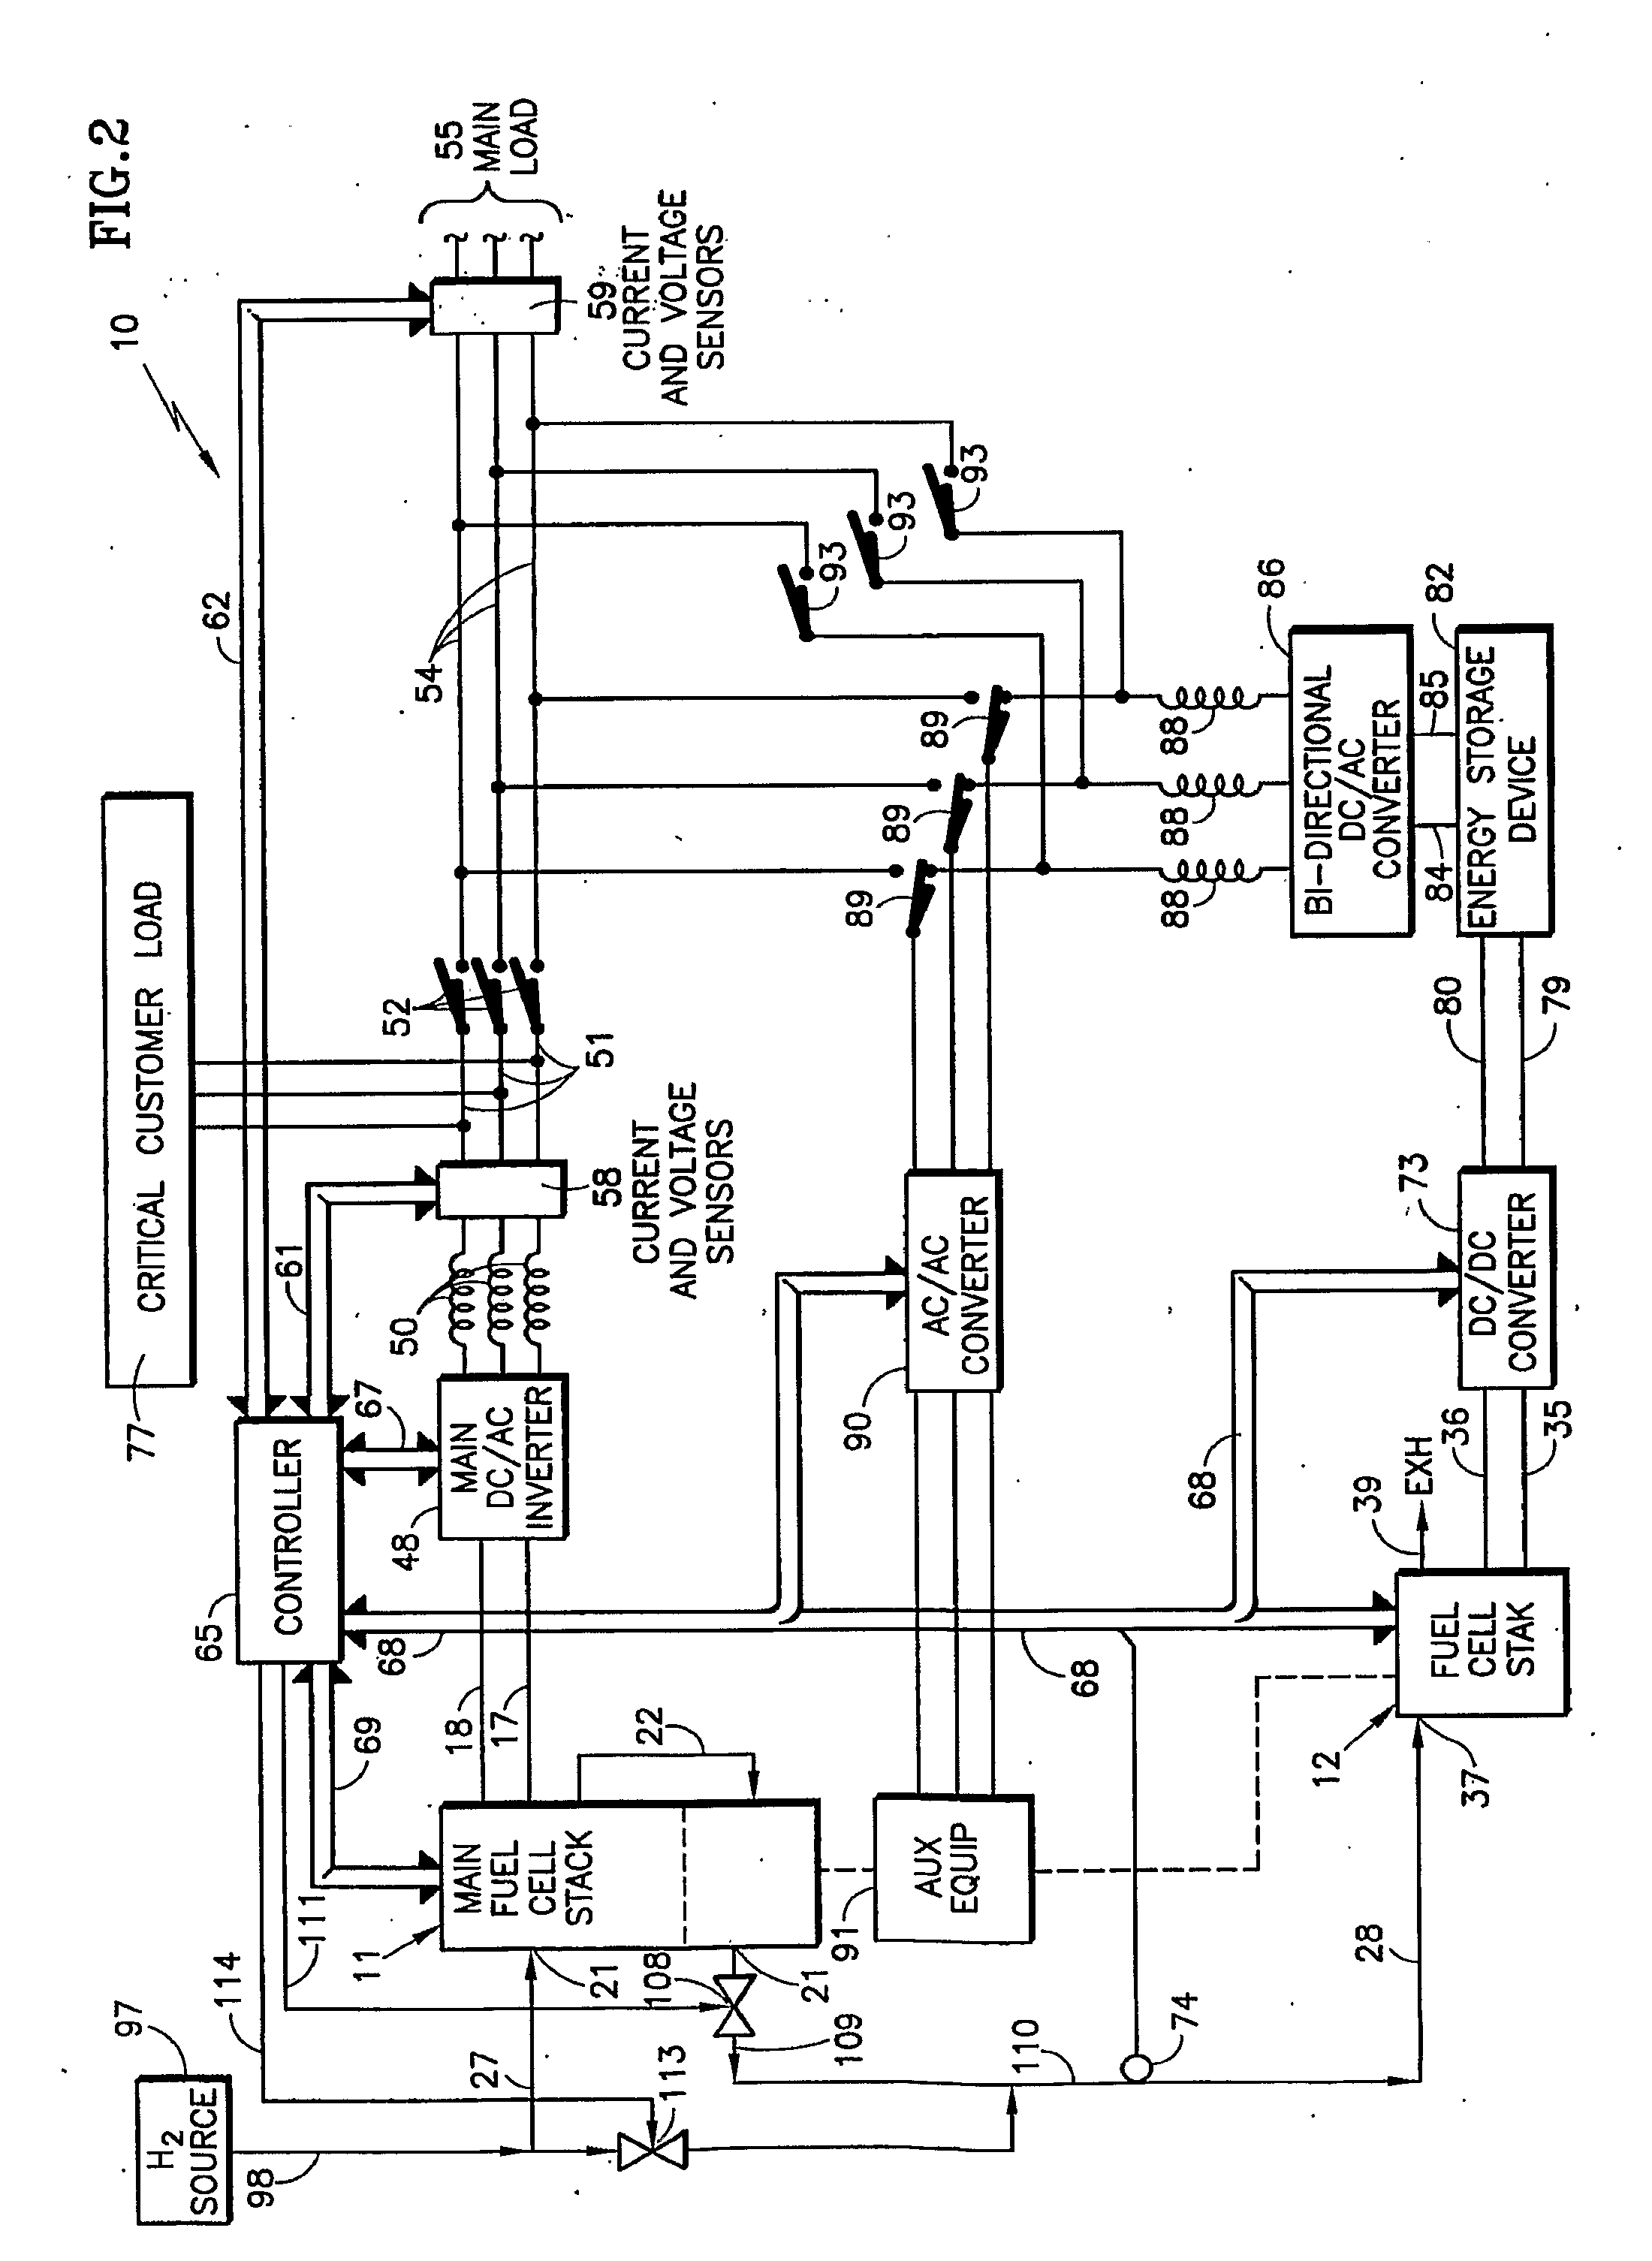 Fuel-cascaded fuel cell stacks with decoupled power outputs